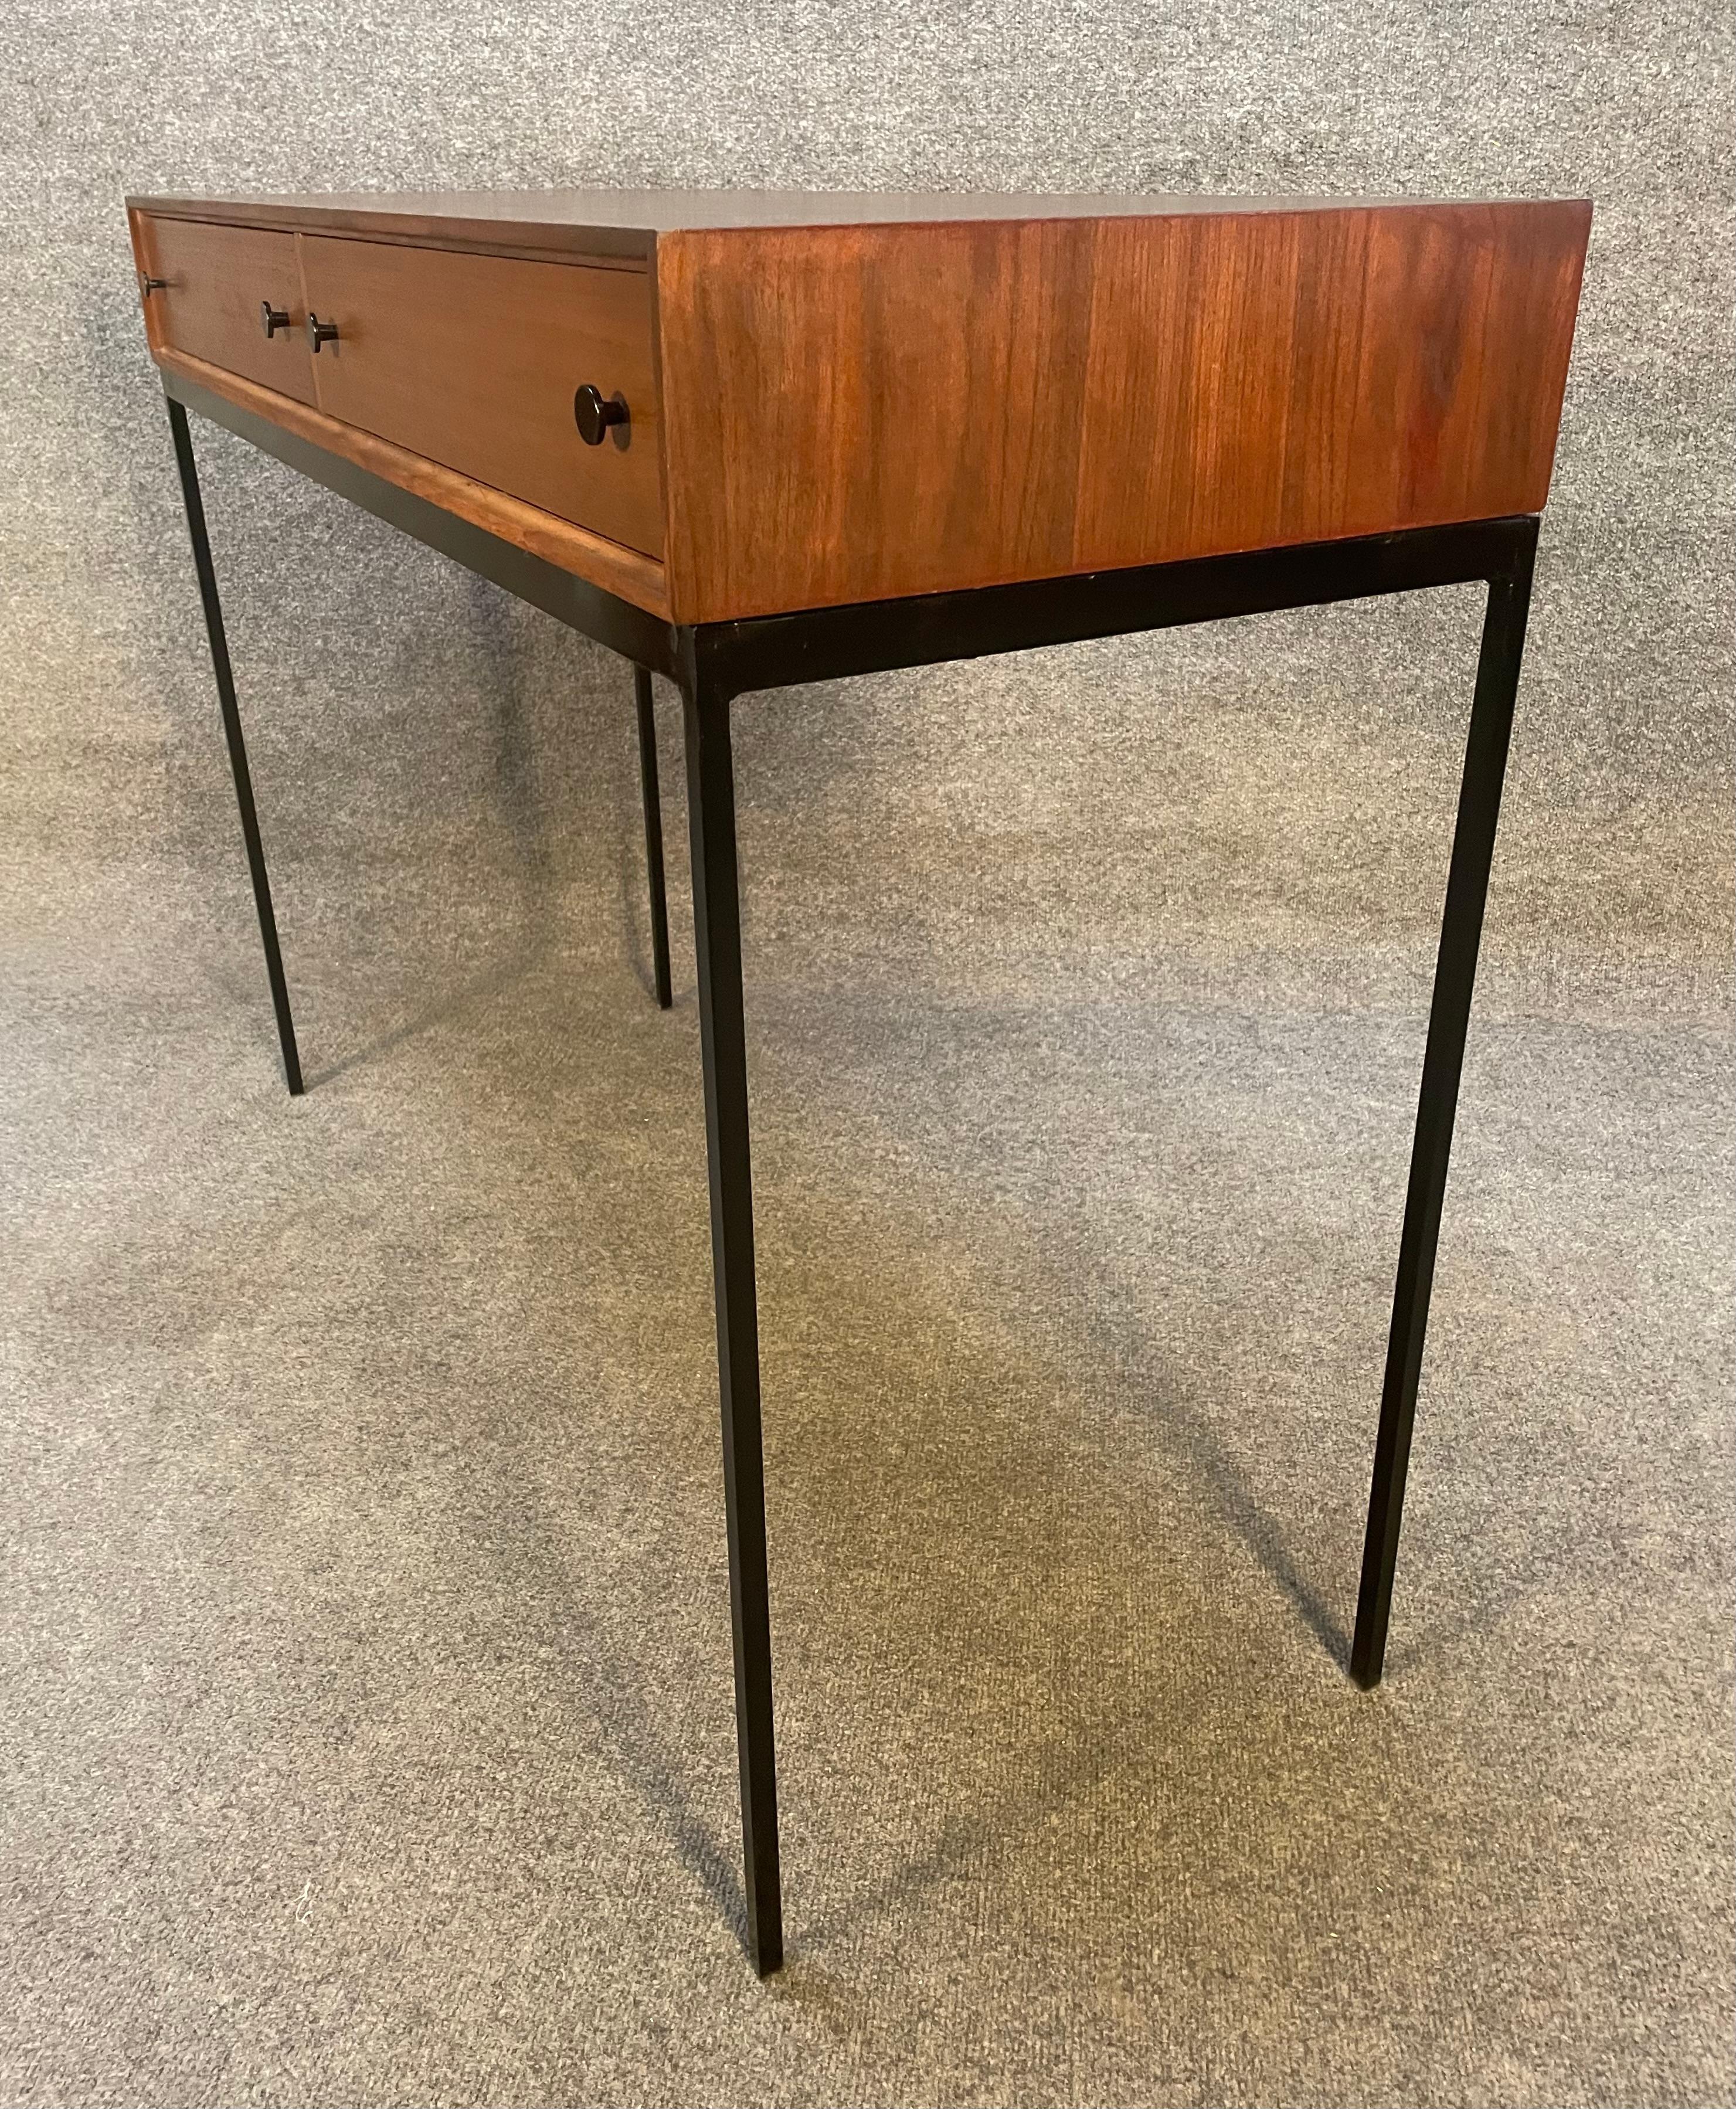 Here is a beautiful scandinavian modern entry way console in walnut designed by Poul Norreklit and manufactured in Sweden in the 1960's.
This lovely case piece, recently imported from Europe to California before its restoration, features a vibrant